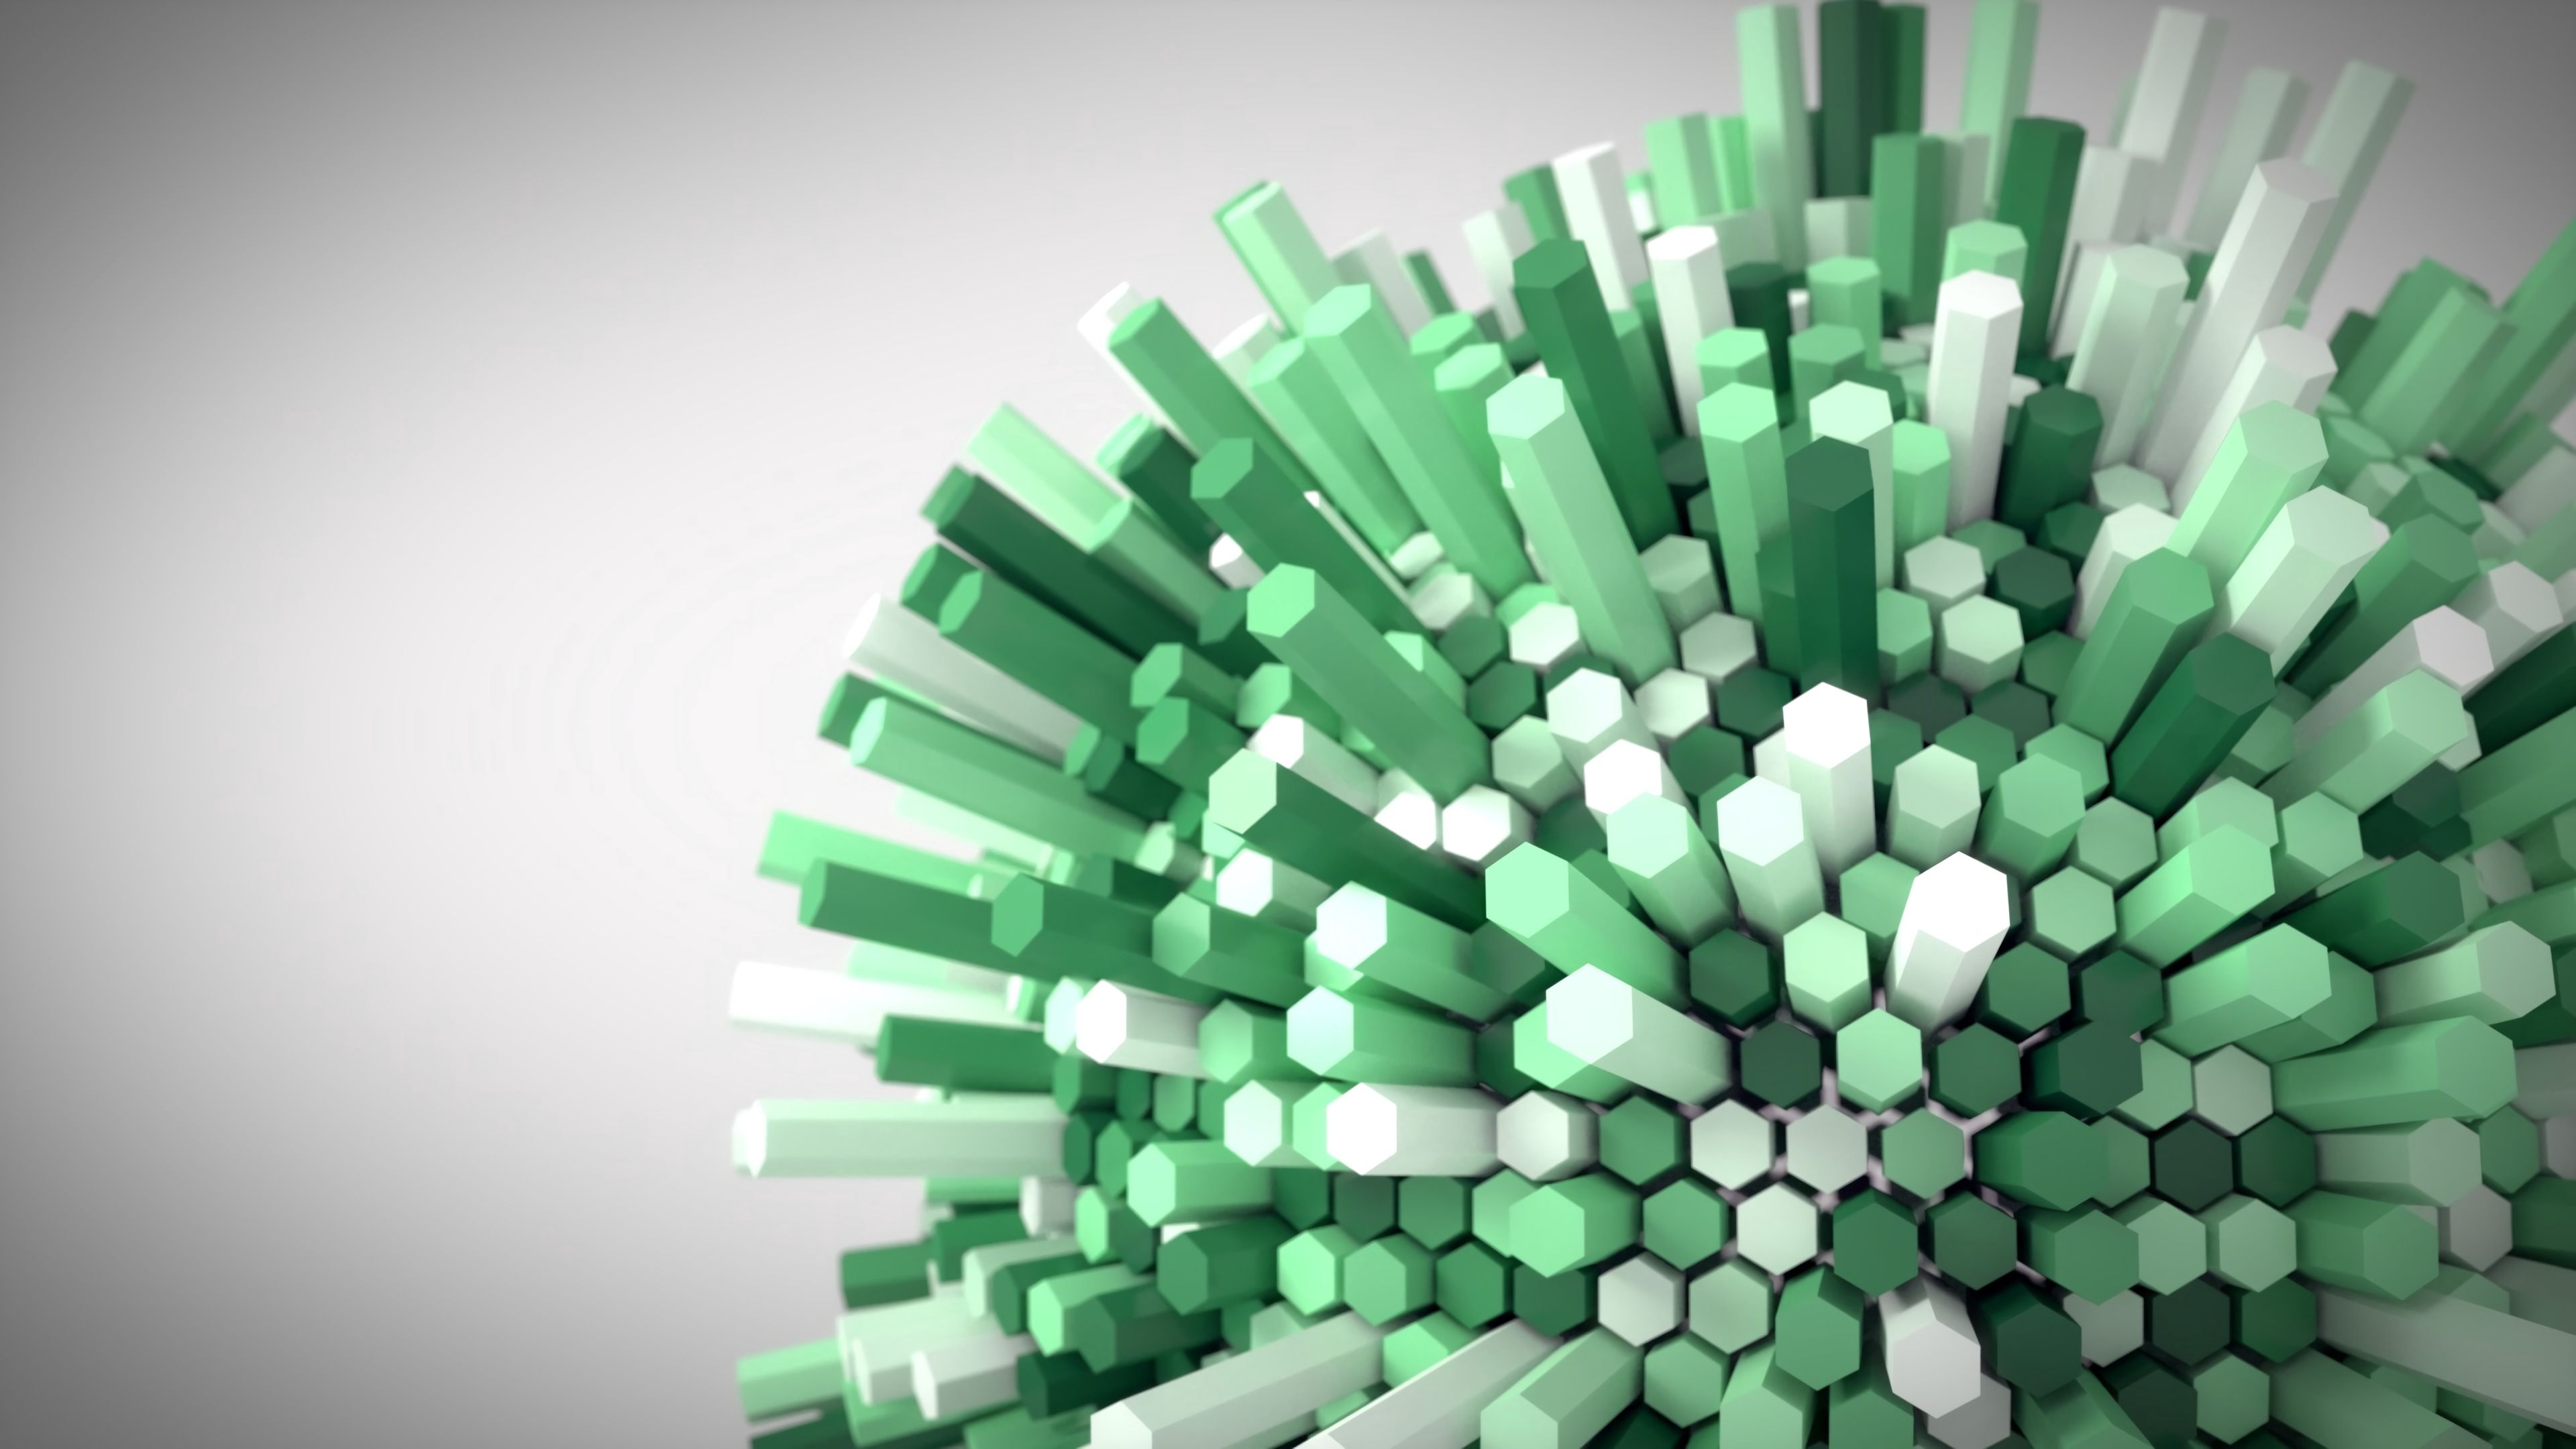 53895 2560x1080 PC pictures for free, download hexagon, honeycomb, 3d, volume 2560x1080 wallpapers on your desktop